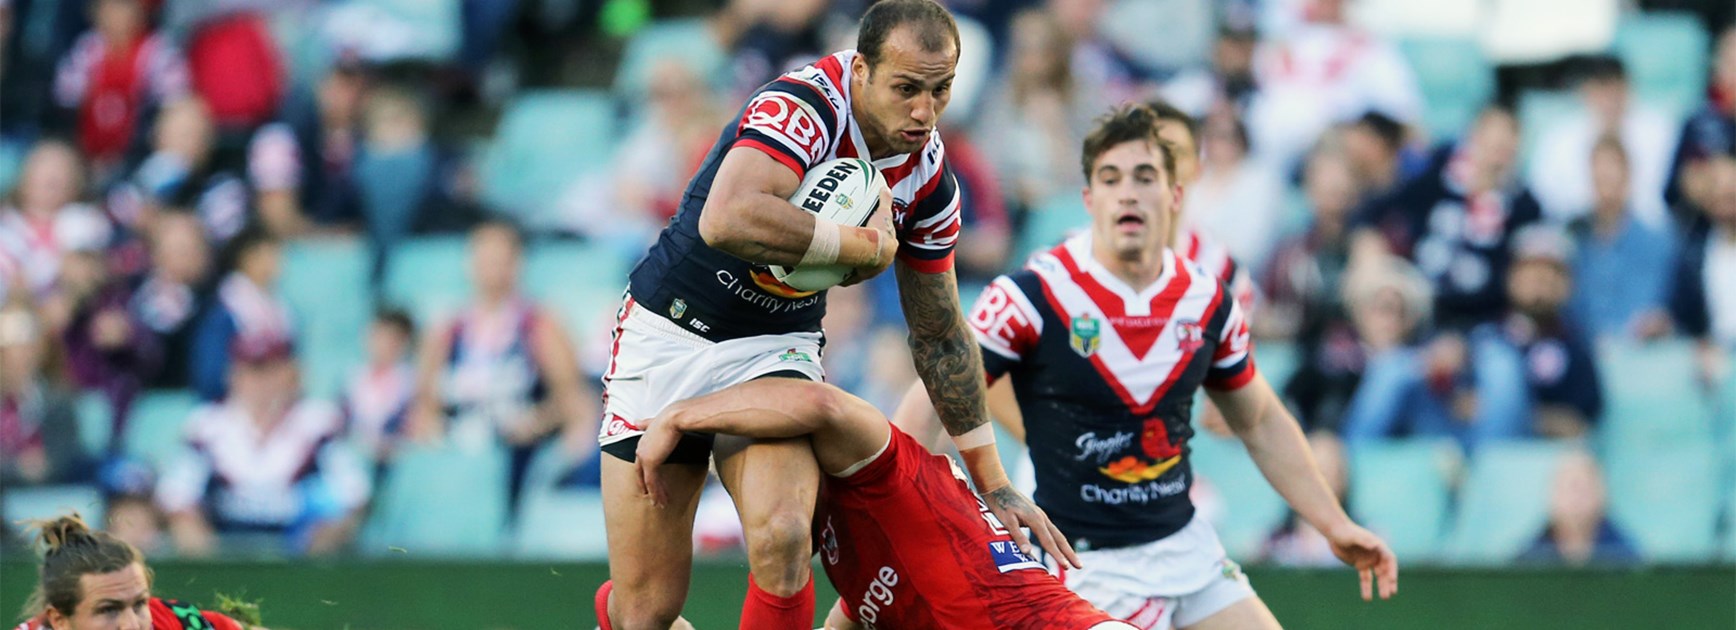 Roosters fullback Blake Ferguson takes a run against the Dragons in Round 24.